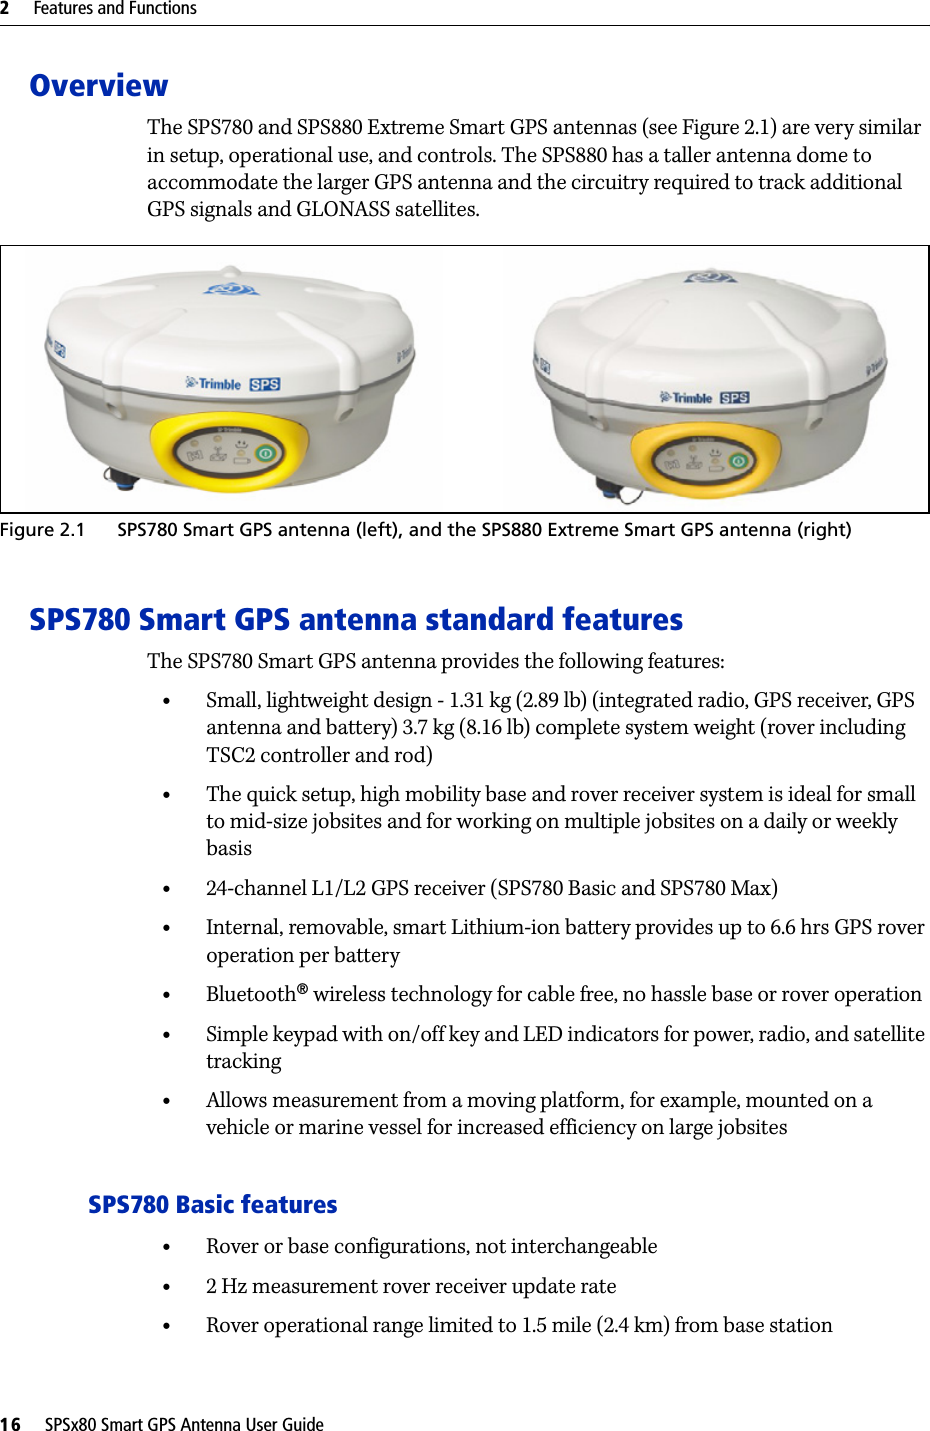 2     Features and Functions16     SPSx80 Smart GPS Antenna User GuideOverviewThe SPS780 and SPS880 Extreme Smart GPS antennas (see Figure 2.1) are very similar in setup, operational use, and controls. The SPS880 has a taller antenna dome to accommodate the larger GPS antenna and the circuitry required to track additional GPS signals and GLONASS satellites. Figure 2.1 SPS780 Smart GPS antenna (left), and the SPS880 Extreme Smart GPS antenna (right)SPS780 Smart GPS antenna standard featuresThe SPS780 Smart GPS antenna provides the following features: •Small, lightweight design - 1.31 kg (2.89 lb) (integrated radio, GPS receiver, GPS antenna and battery) 3.7 kg (8.16 lb) complete system weight (rover including TSC2 controller and rod)•The quick setup, high mobility base and rover receiver system is ideal for small to mid-size jobsites and for working on multiple jobsites on a daily or weekly basis•24-channel L1/L2 GPS receiver (SPS780 Basic and SPS780 Max)•Internal, removable, smart Lithium-ion battery provides up to 6.6 hrs GPS rover operation per battery•Bluetooth® wireless technology for cable free, no hassle base or rover operation•Simple keypad with on/off key and LED indicators for power, radio, and satellite tracking•Allows measurement from a moving platform, for example, mounted on a vehicle or marine vessel for increased efficiency on large jobsitesSPS780 Basic features•Rover or base configurations, not interchangeable•2 Hz measurement rover receiver update rate•Rover operational range limited to 1.5 mile (2.4 km) from base station